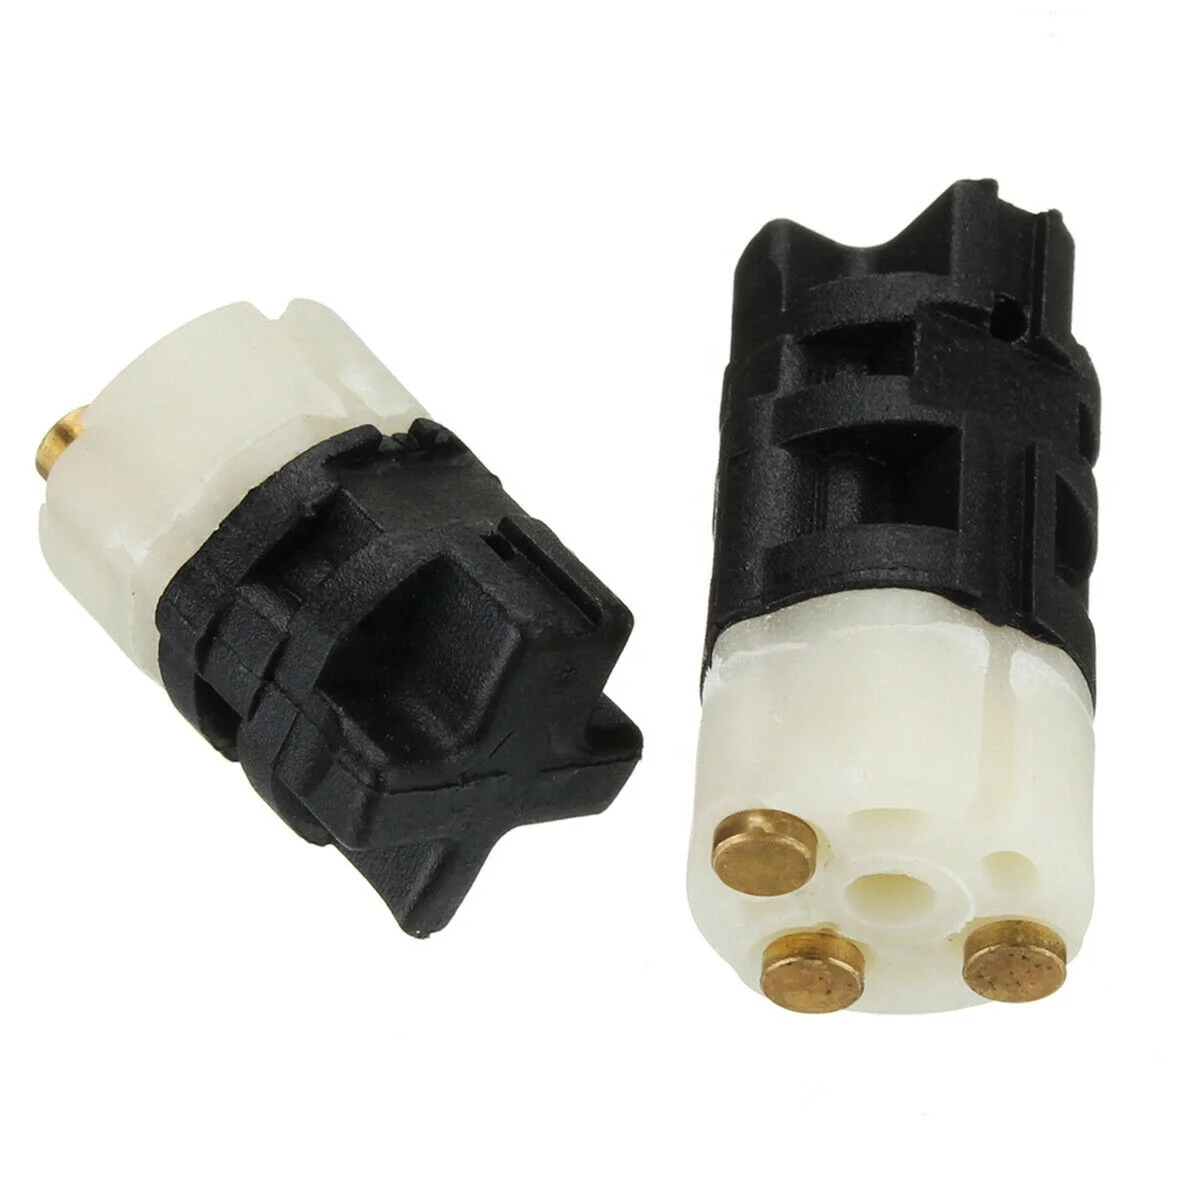 Alupre 2pcs Vehicle Auto Transmission 722.9 Speed Sensor Fit Compatible With B-E-N-Z for Y.3/8n1 for Y.3/8n2 